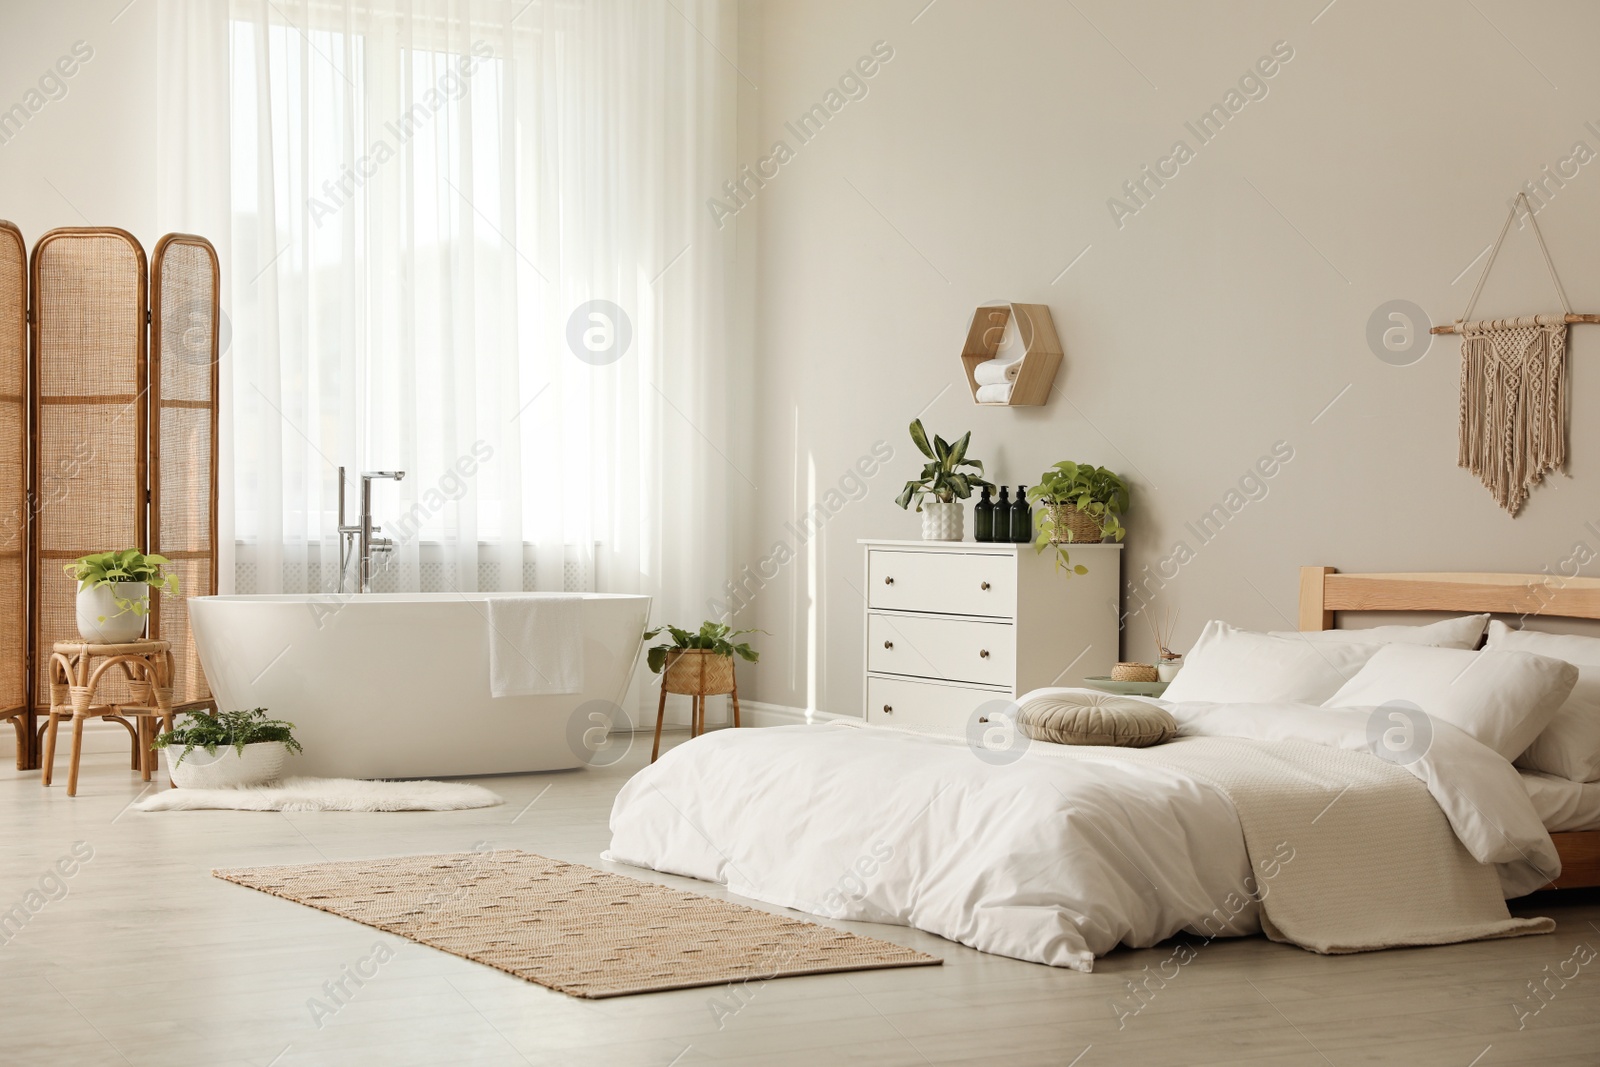 Photo of Stylish apartment interior with white bathtub and bed